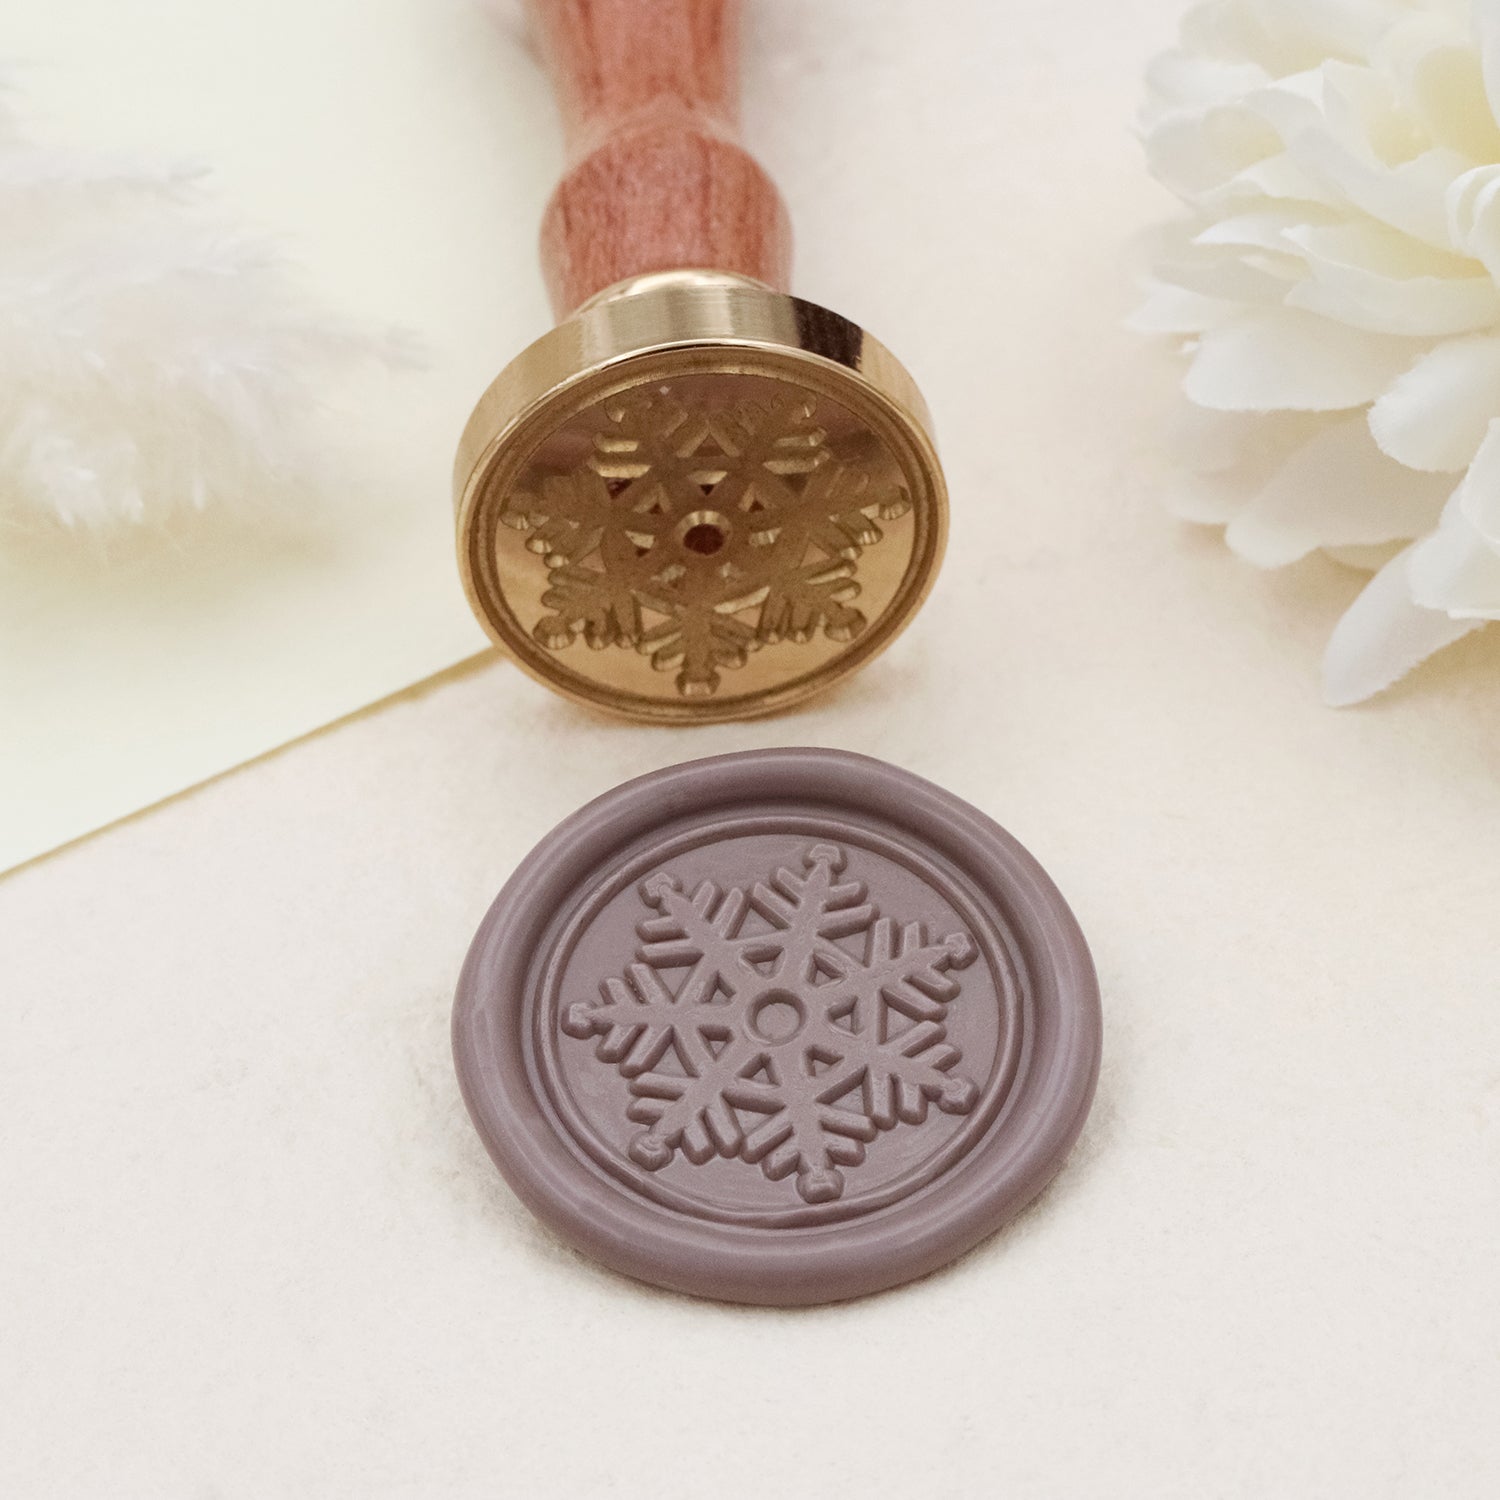 Winter Suit Wax Seal Stamp Accessories Snowflake Stampers Sealing Wax Stamp  Heads Wax Sealing Stamp Heads